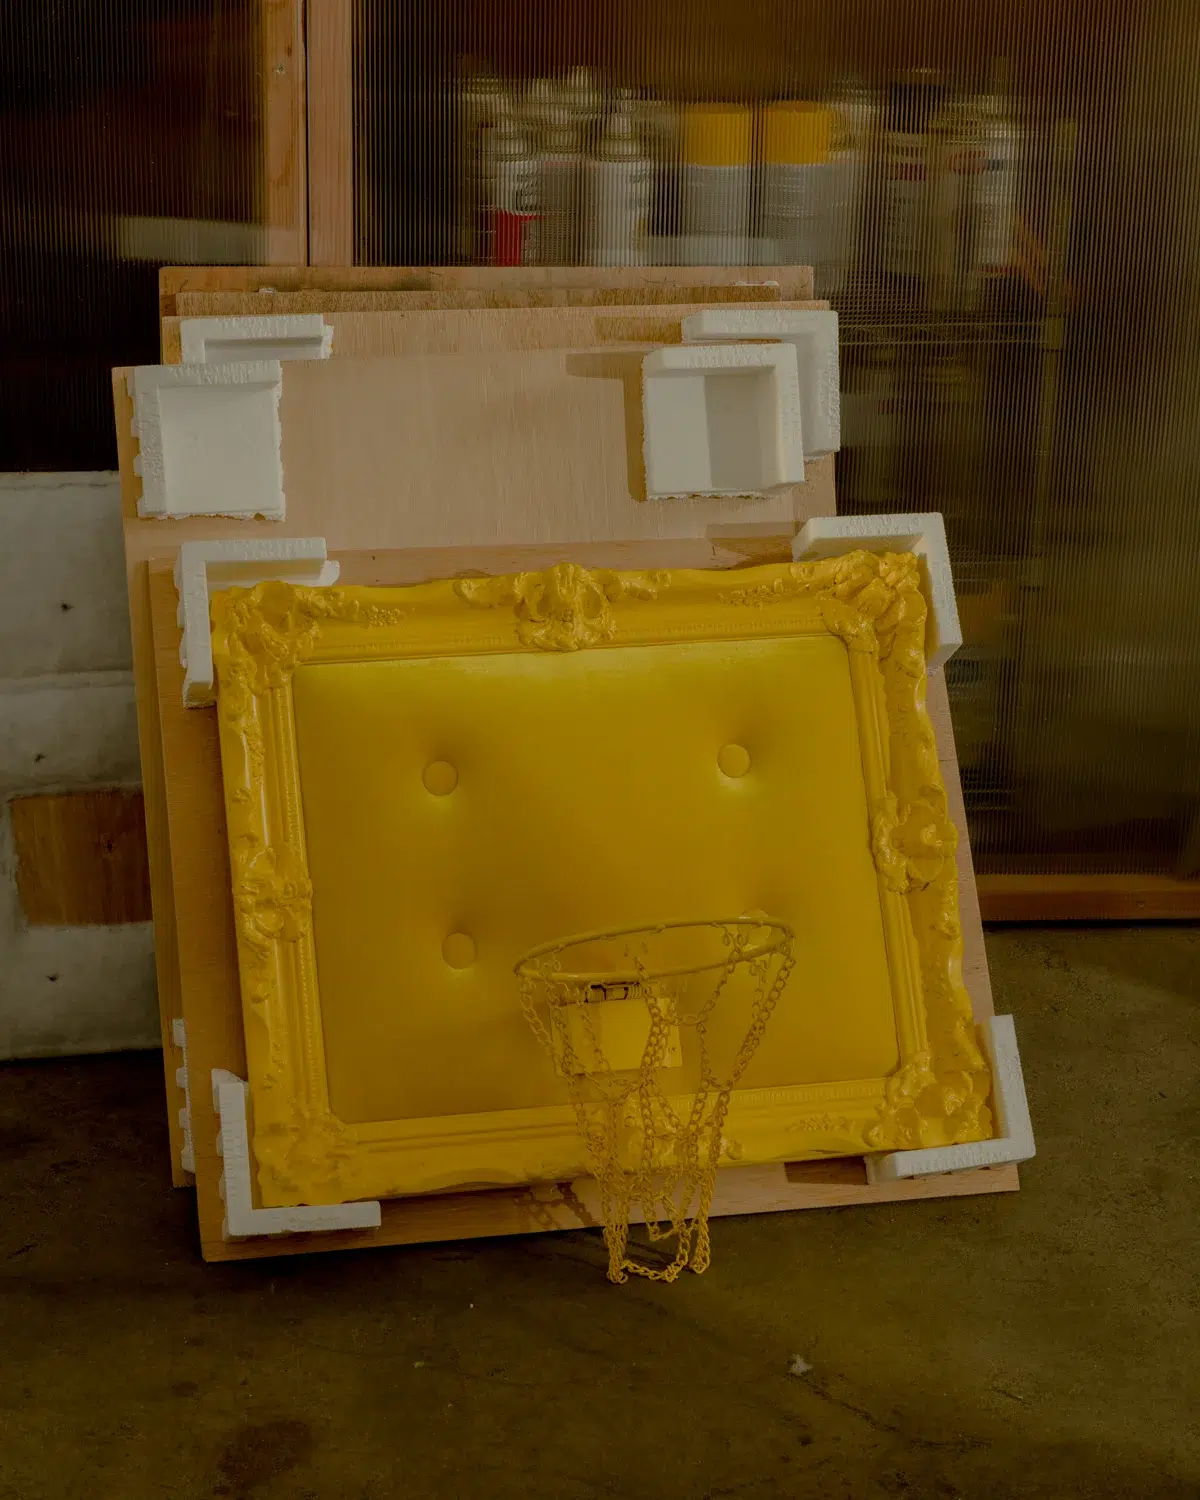 A yellow velvet hoop presented in a box.